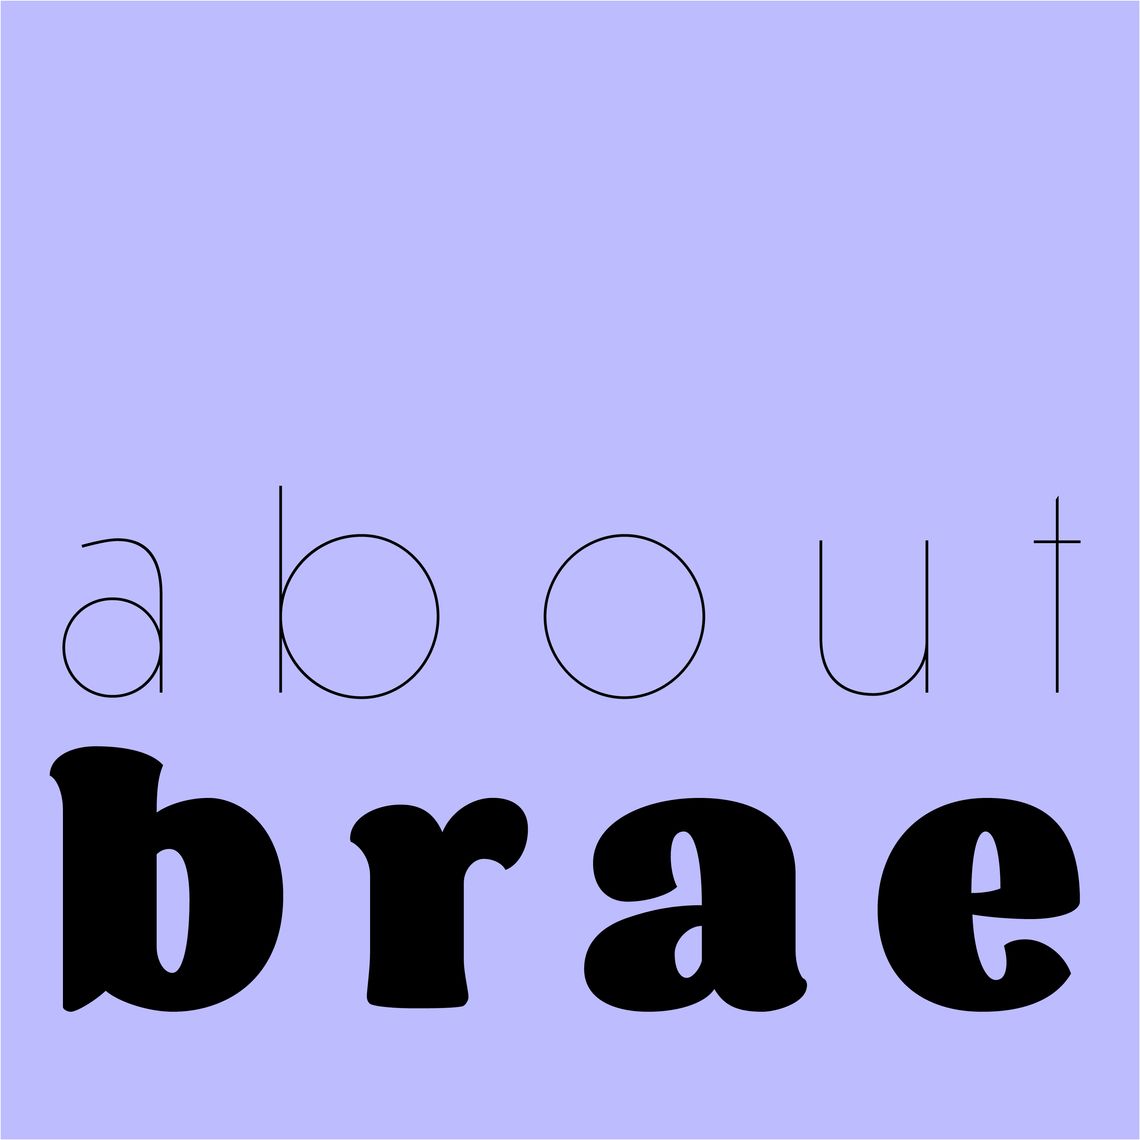 About Brae